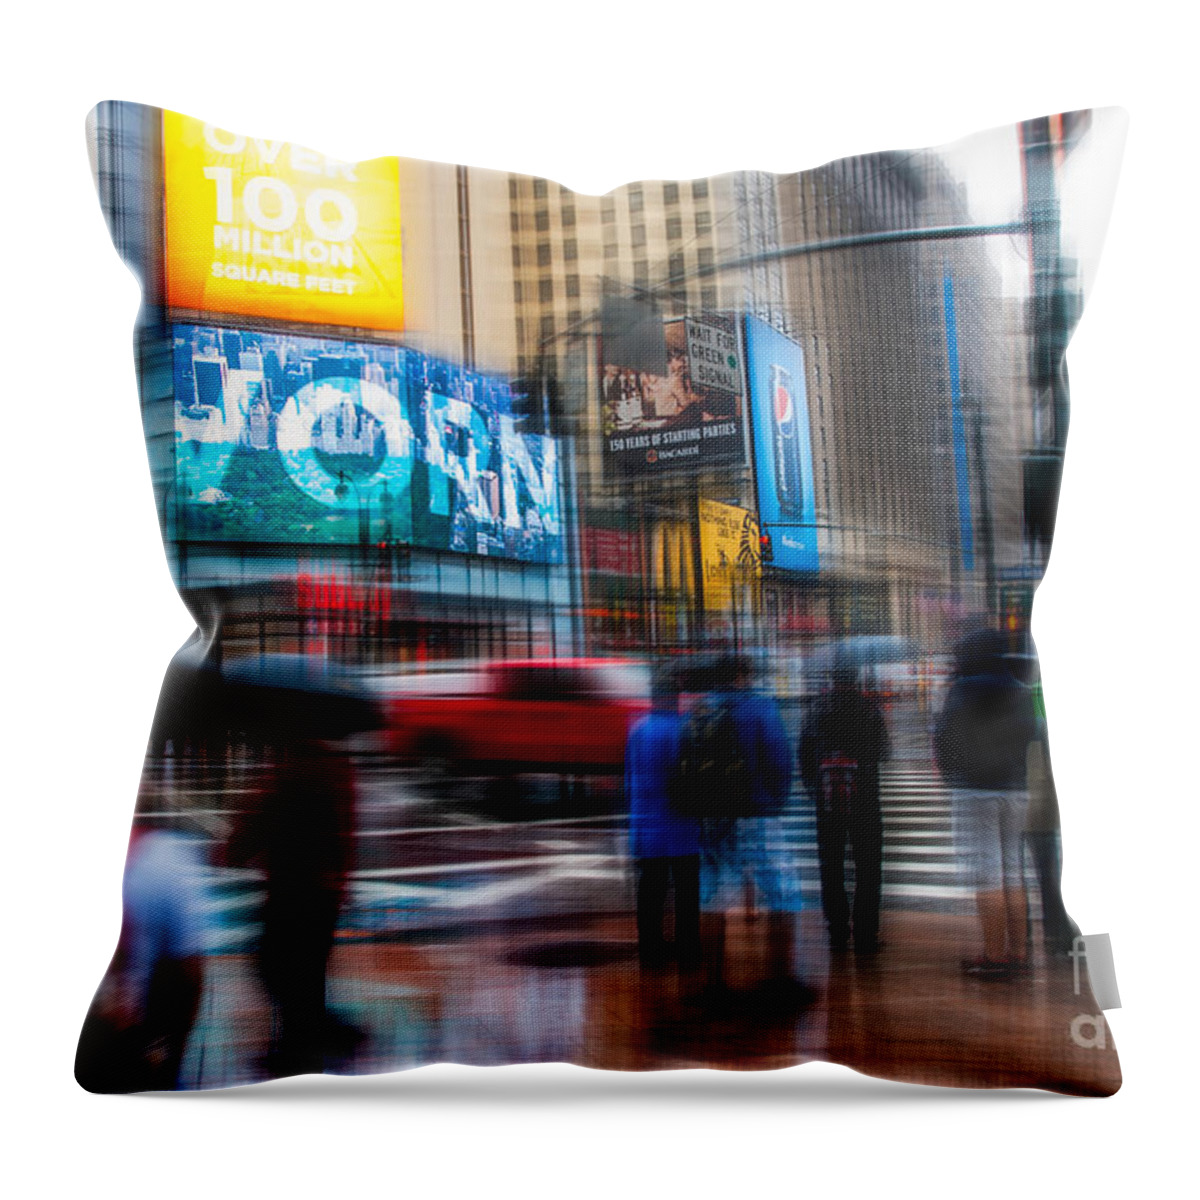 Nyc Throw Pillow featuring the photograph A Rainy Day In New York #1 by Hannes Cmarits